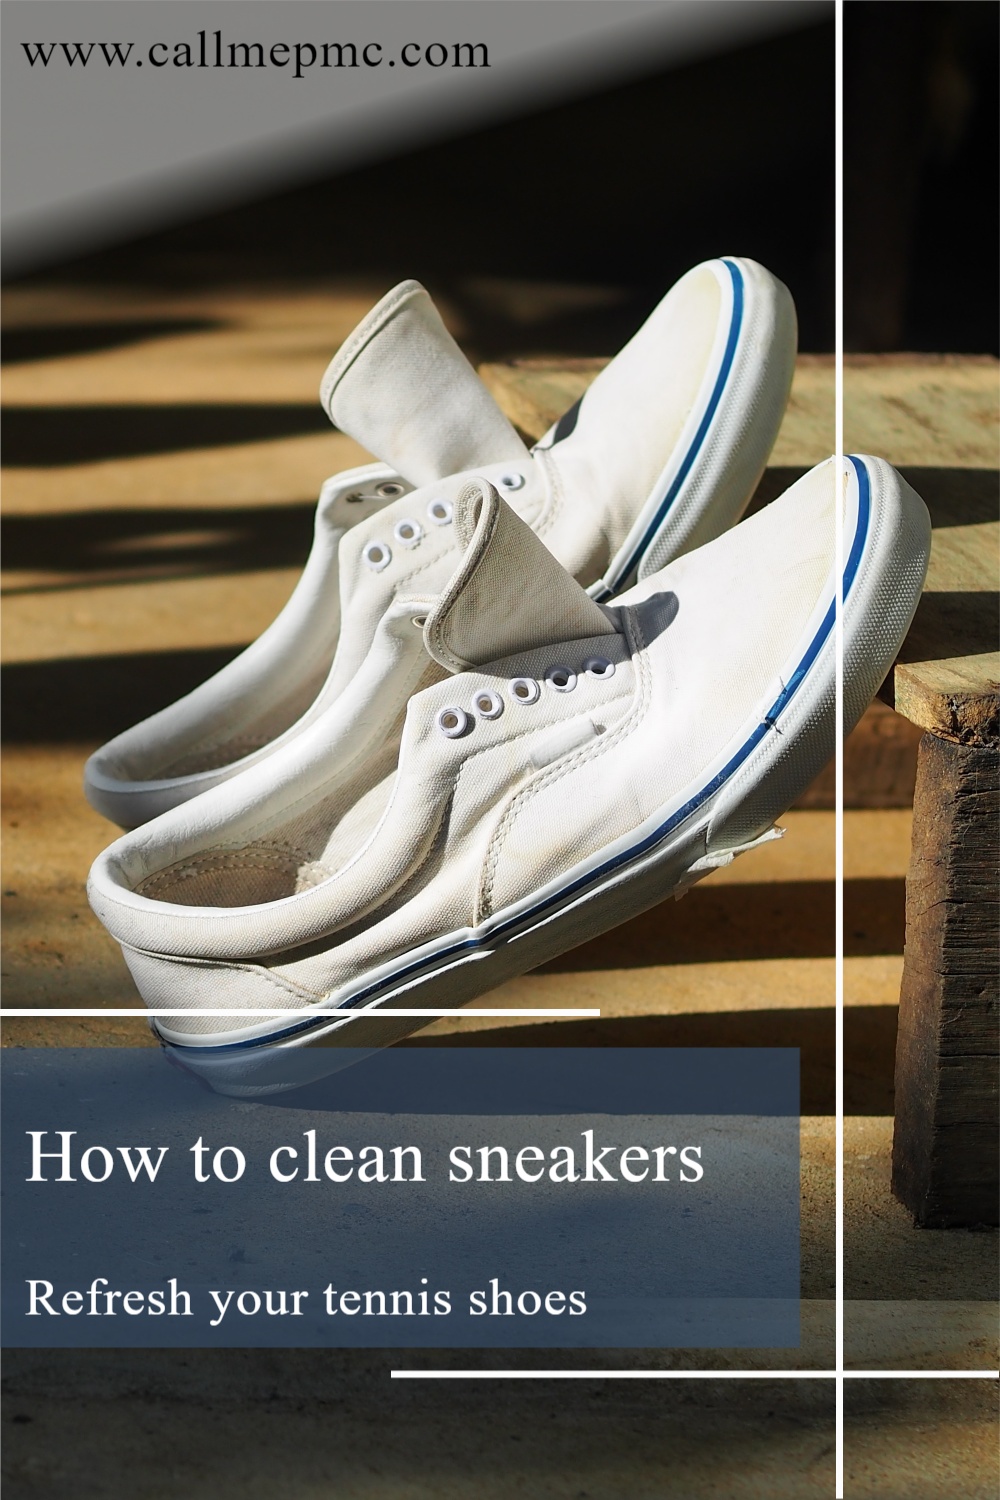 How to clean sneakers refresh your tennis shoes.